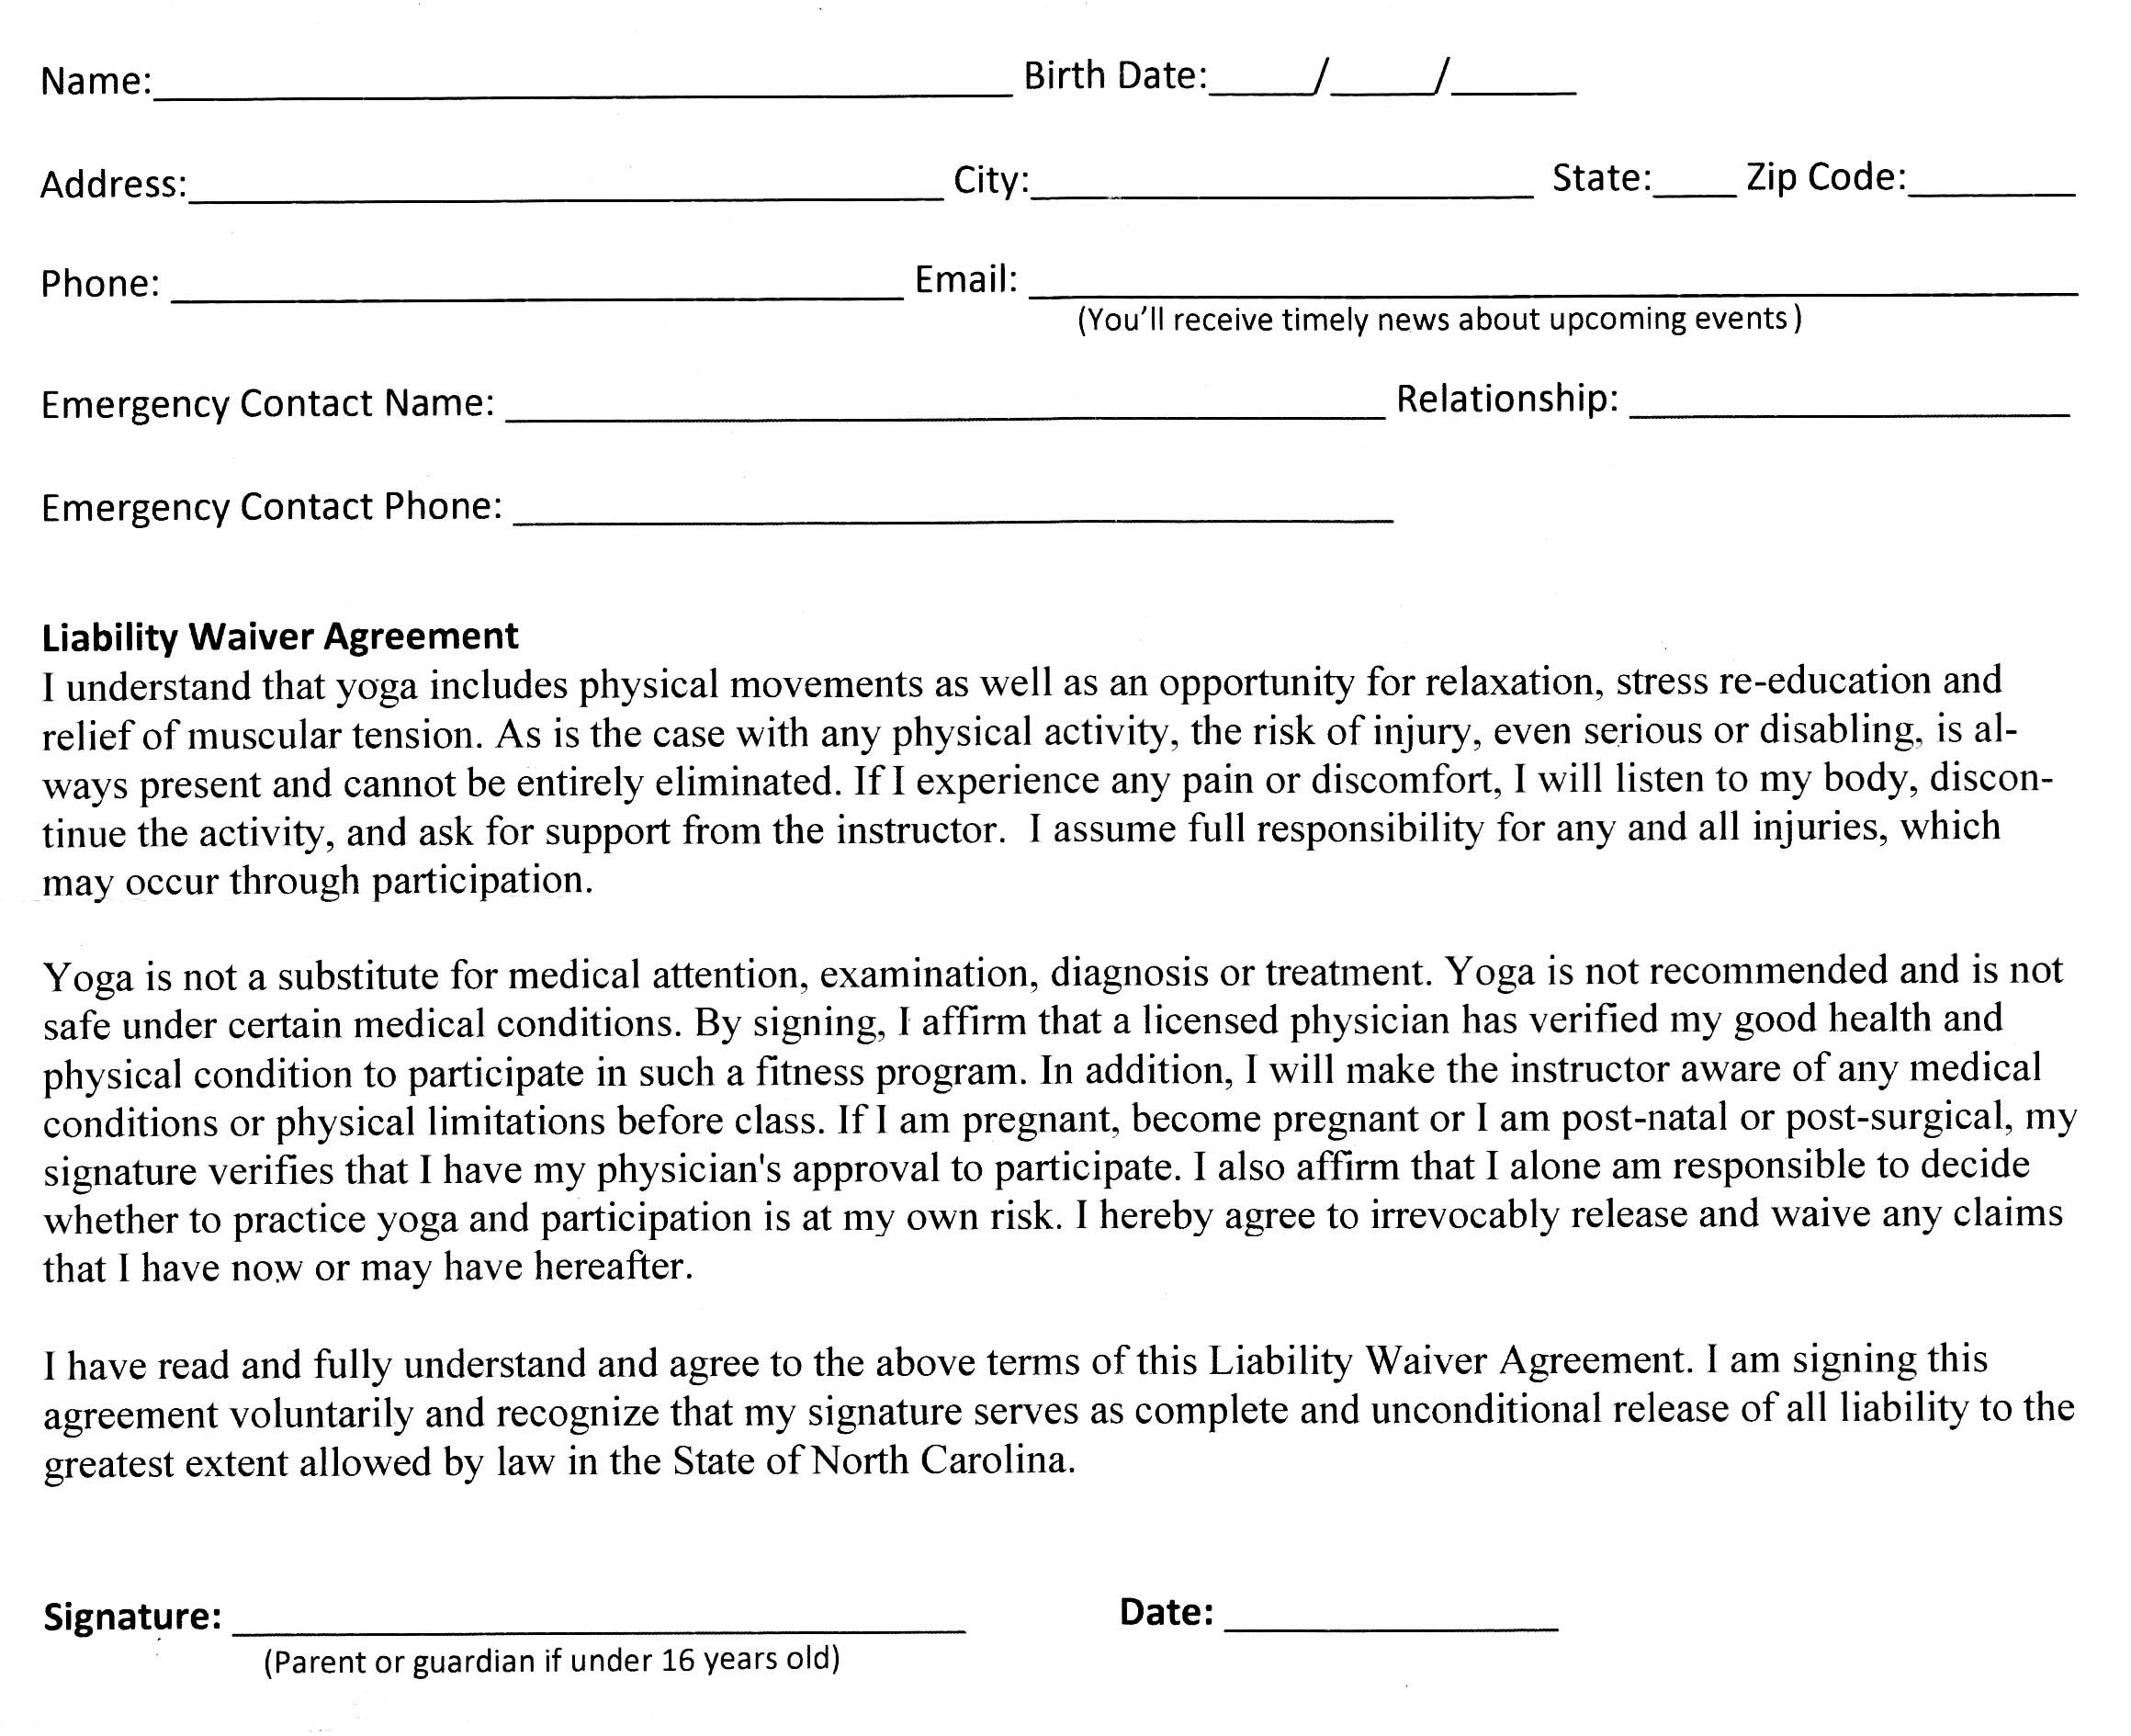 Liability Release Agreement Liability Waiver Agreement Yogaray